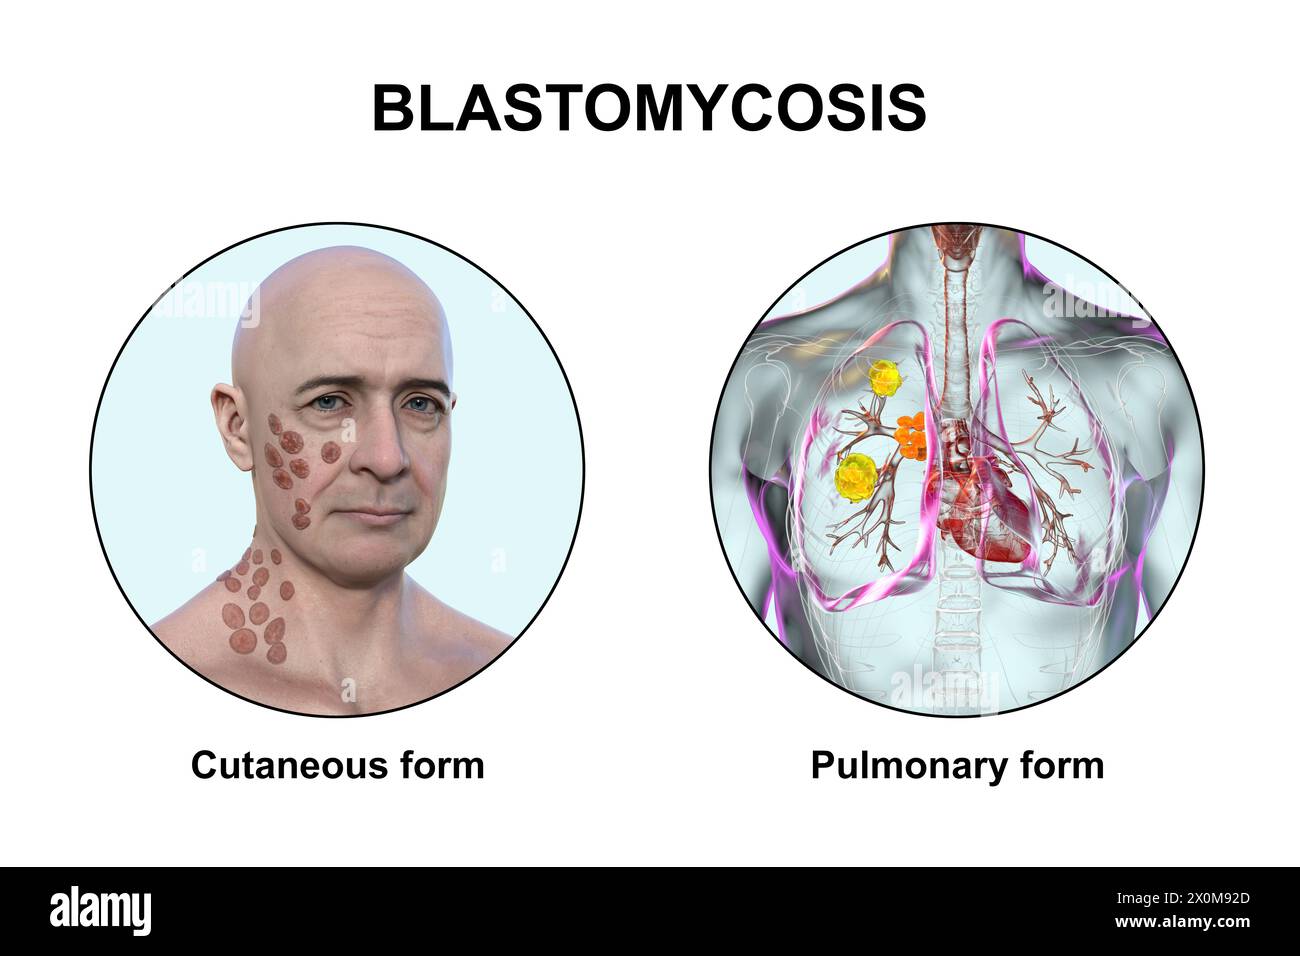 3D illustration showing two clinical presentations of blastomycosis: cutaneous (affecting the skin) and pulmonary (affecting the lungs). Blastomycosis is a fungal infection that can occur after inhaling Blastomyces dermatitidis spores. It is often asymptomatic, but where symptoms develop they primarily affect the lungs, with some patients also developing skin lesions. Stock Photo